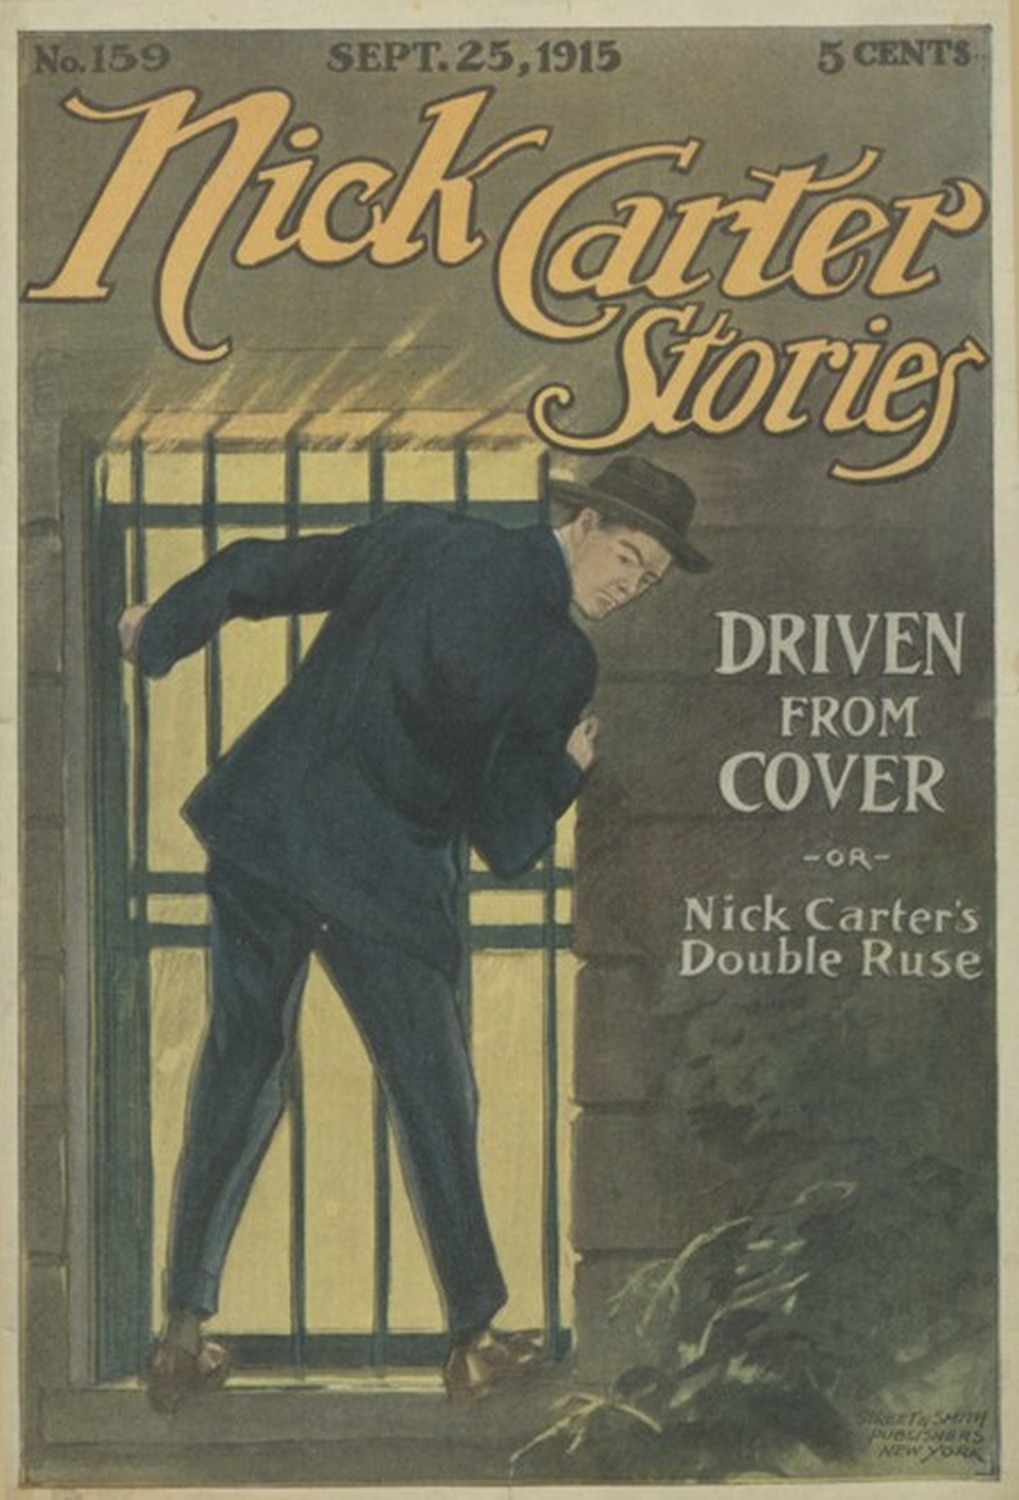 Nick Carter Stories No. 159, September 25, 1915: Driven from cover; or, Nick Carter's double ruse.